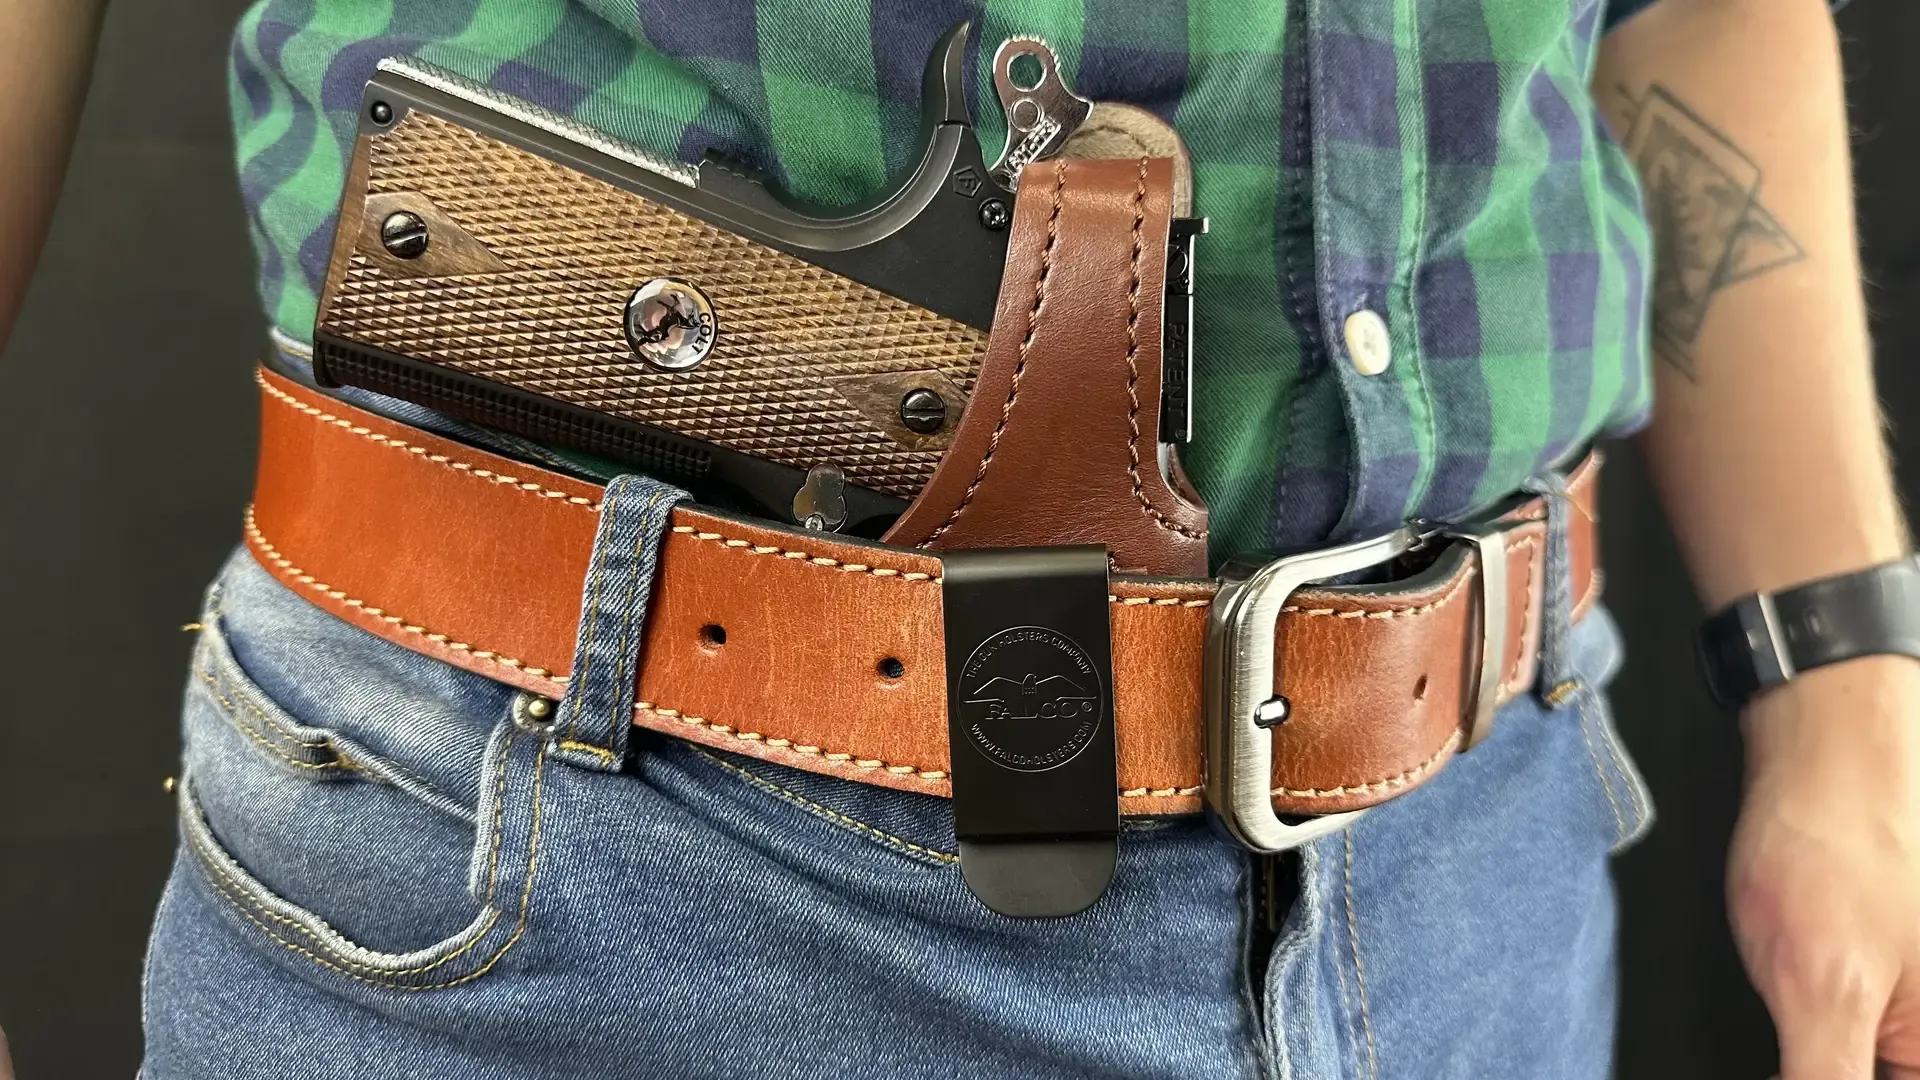 Level 1 Leather IWB holster for 1911